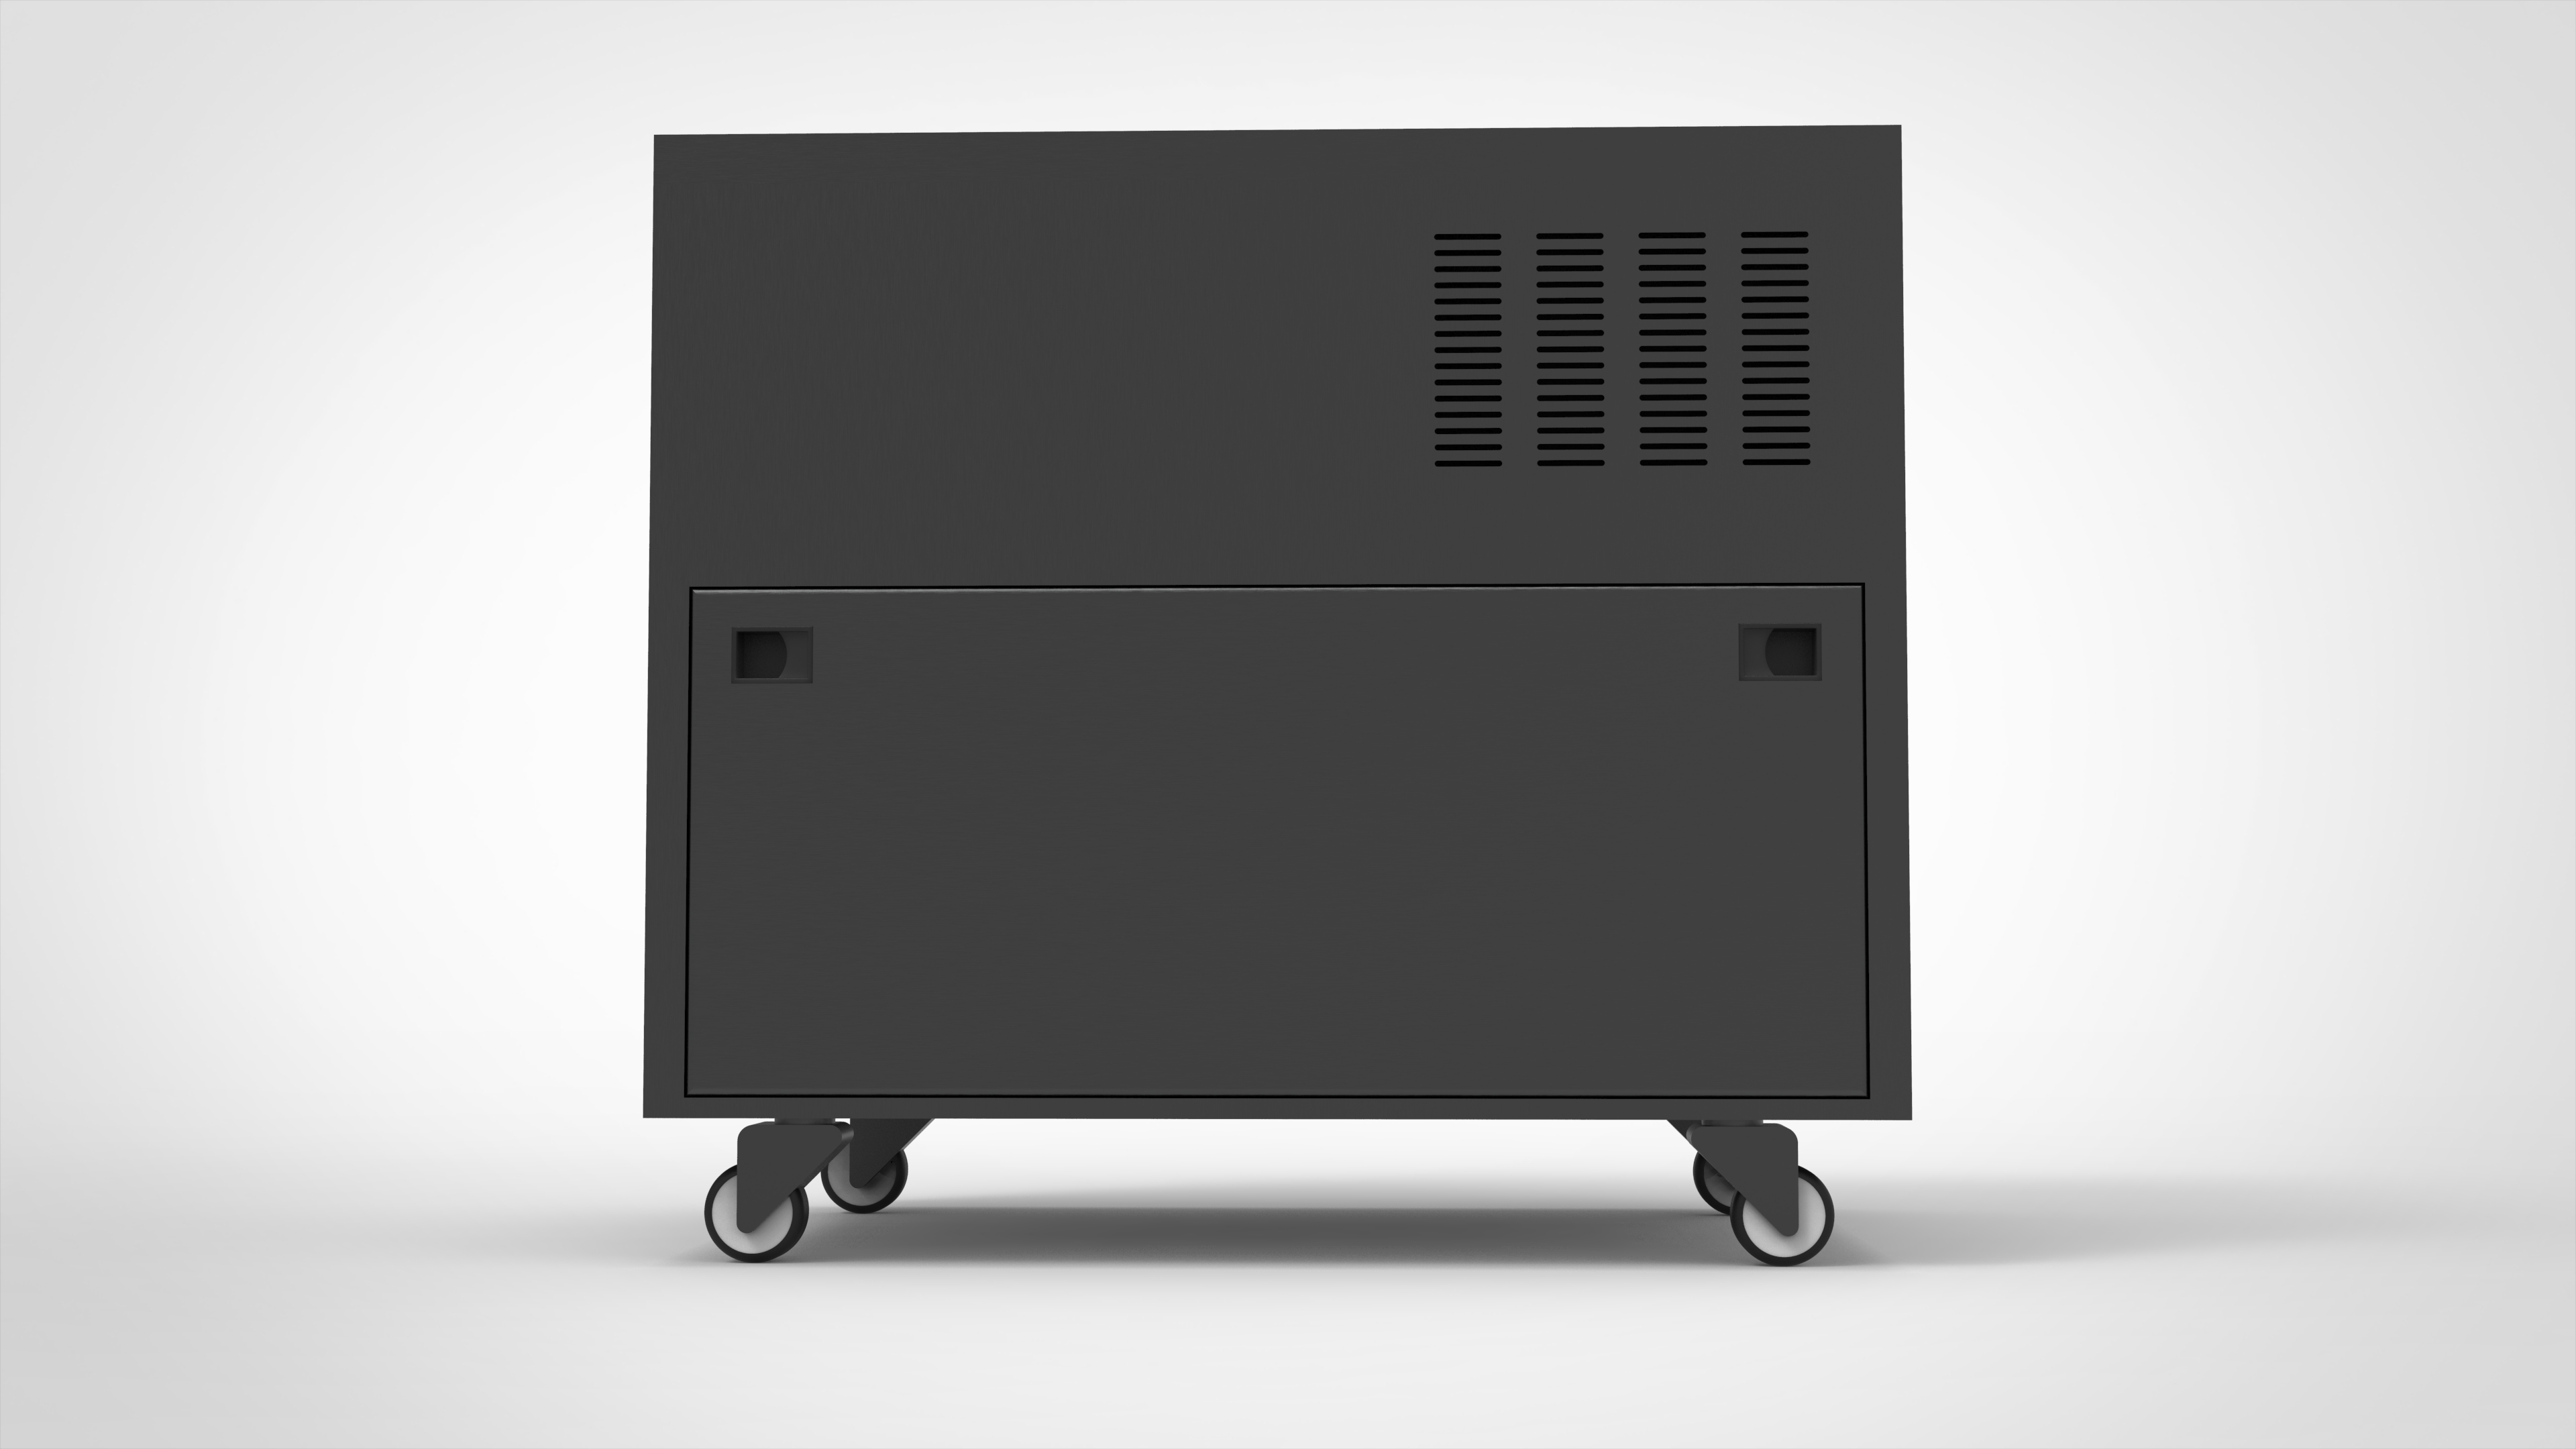 3000w High Capacity in One Solar Power System for Emergency